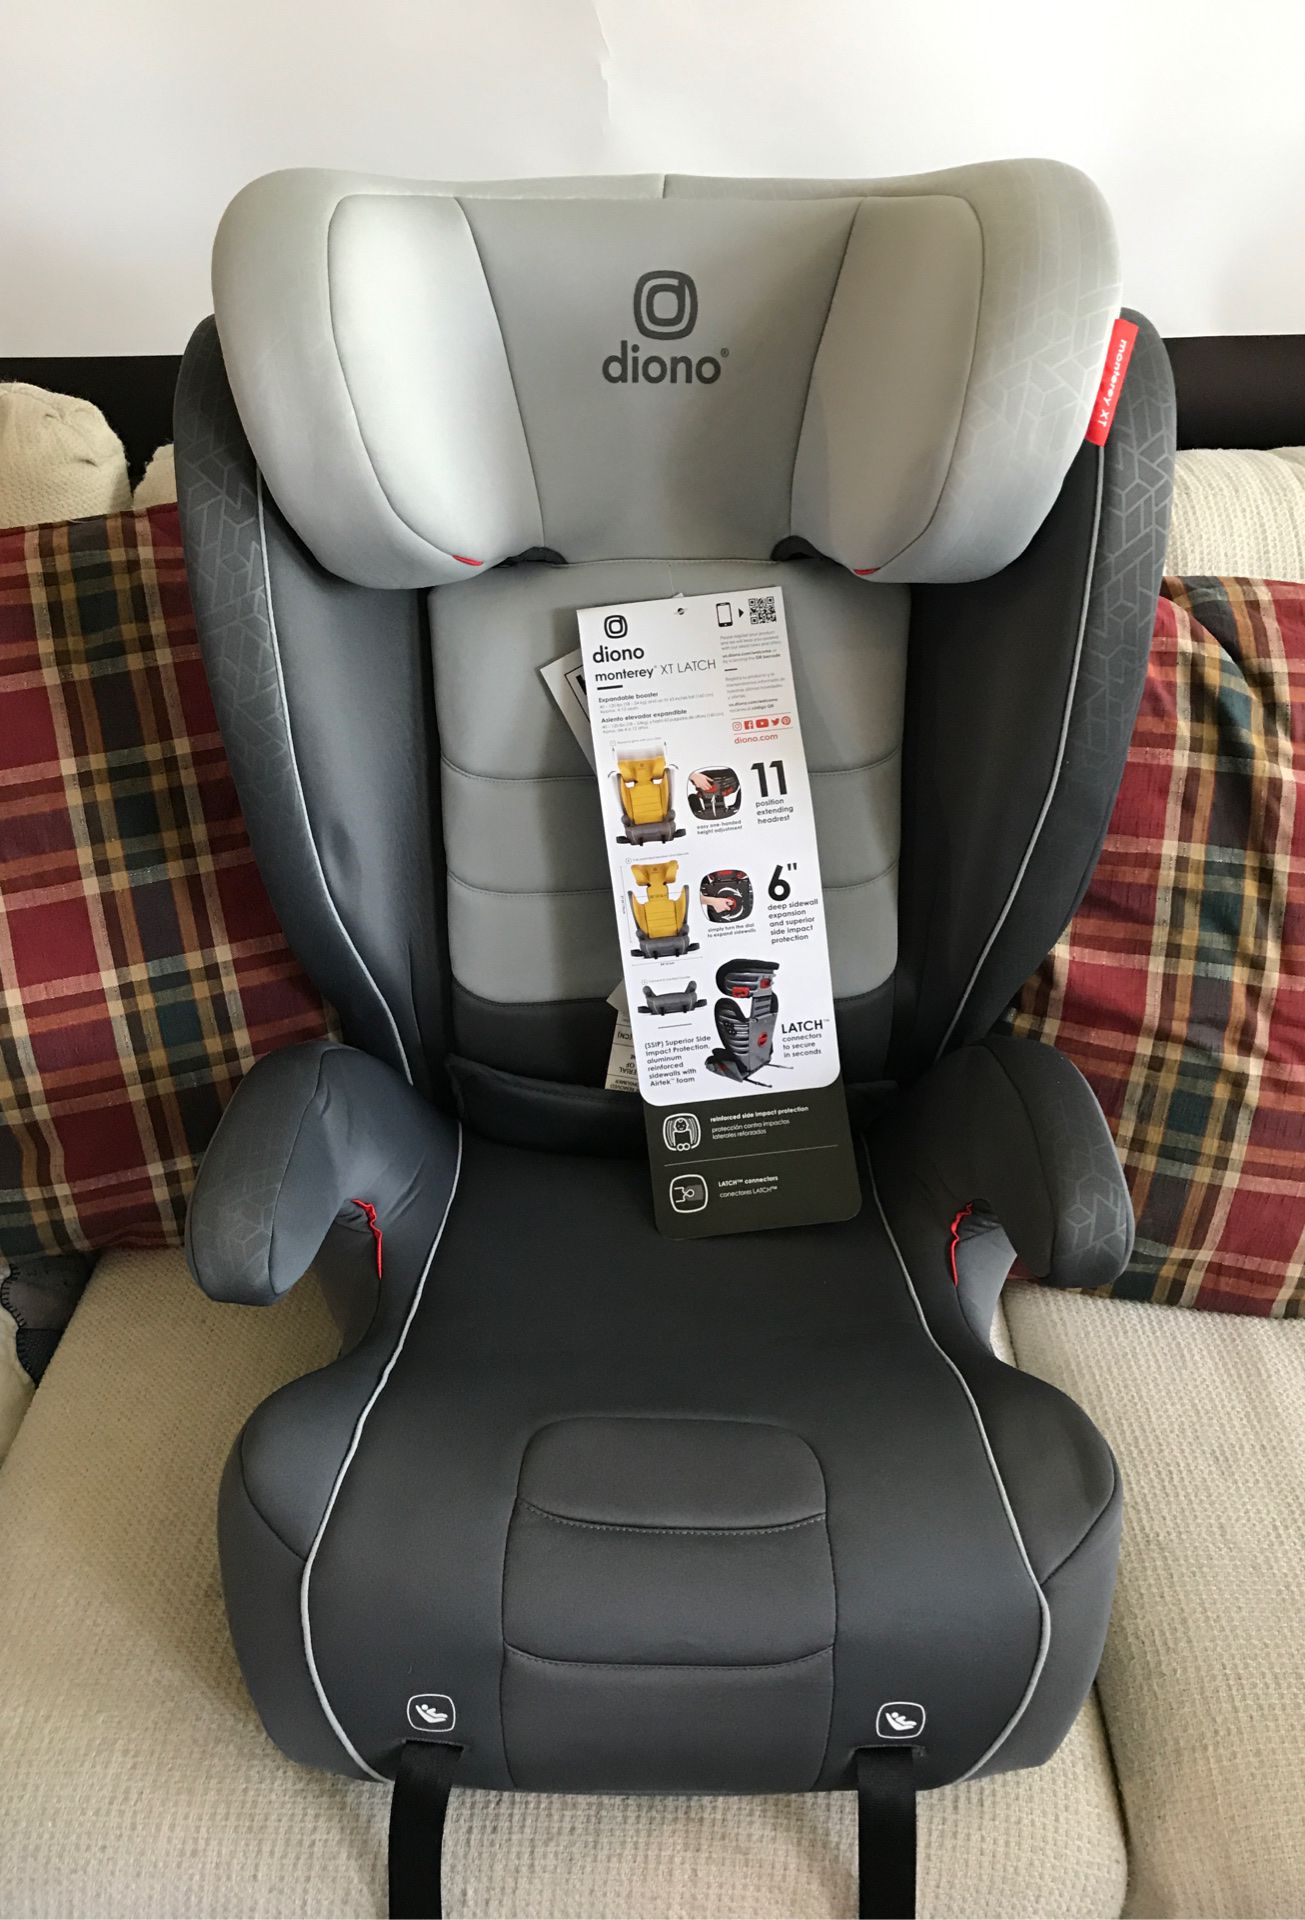 Diono Monterey XT Latch Expandable booster car seat. New $40